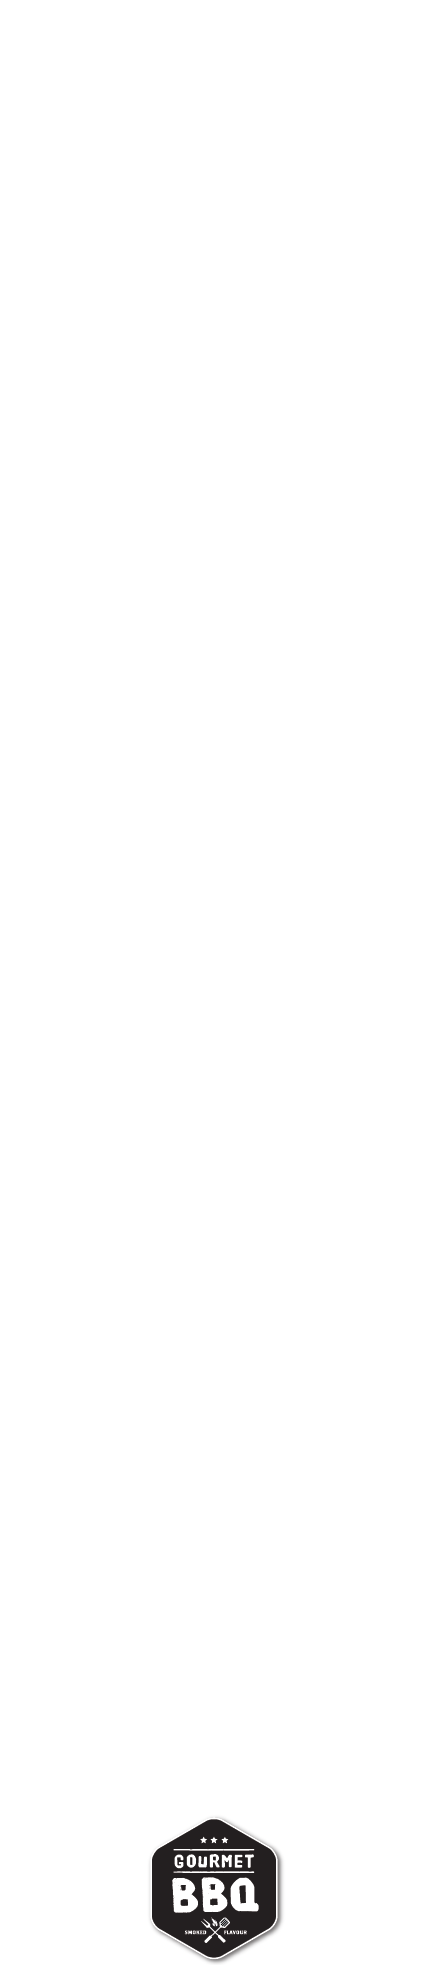 Get to know your meat cuts mobile